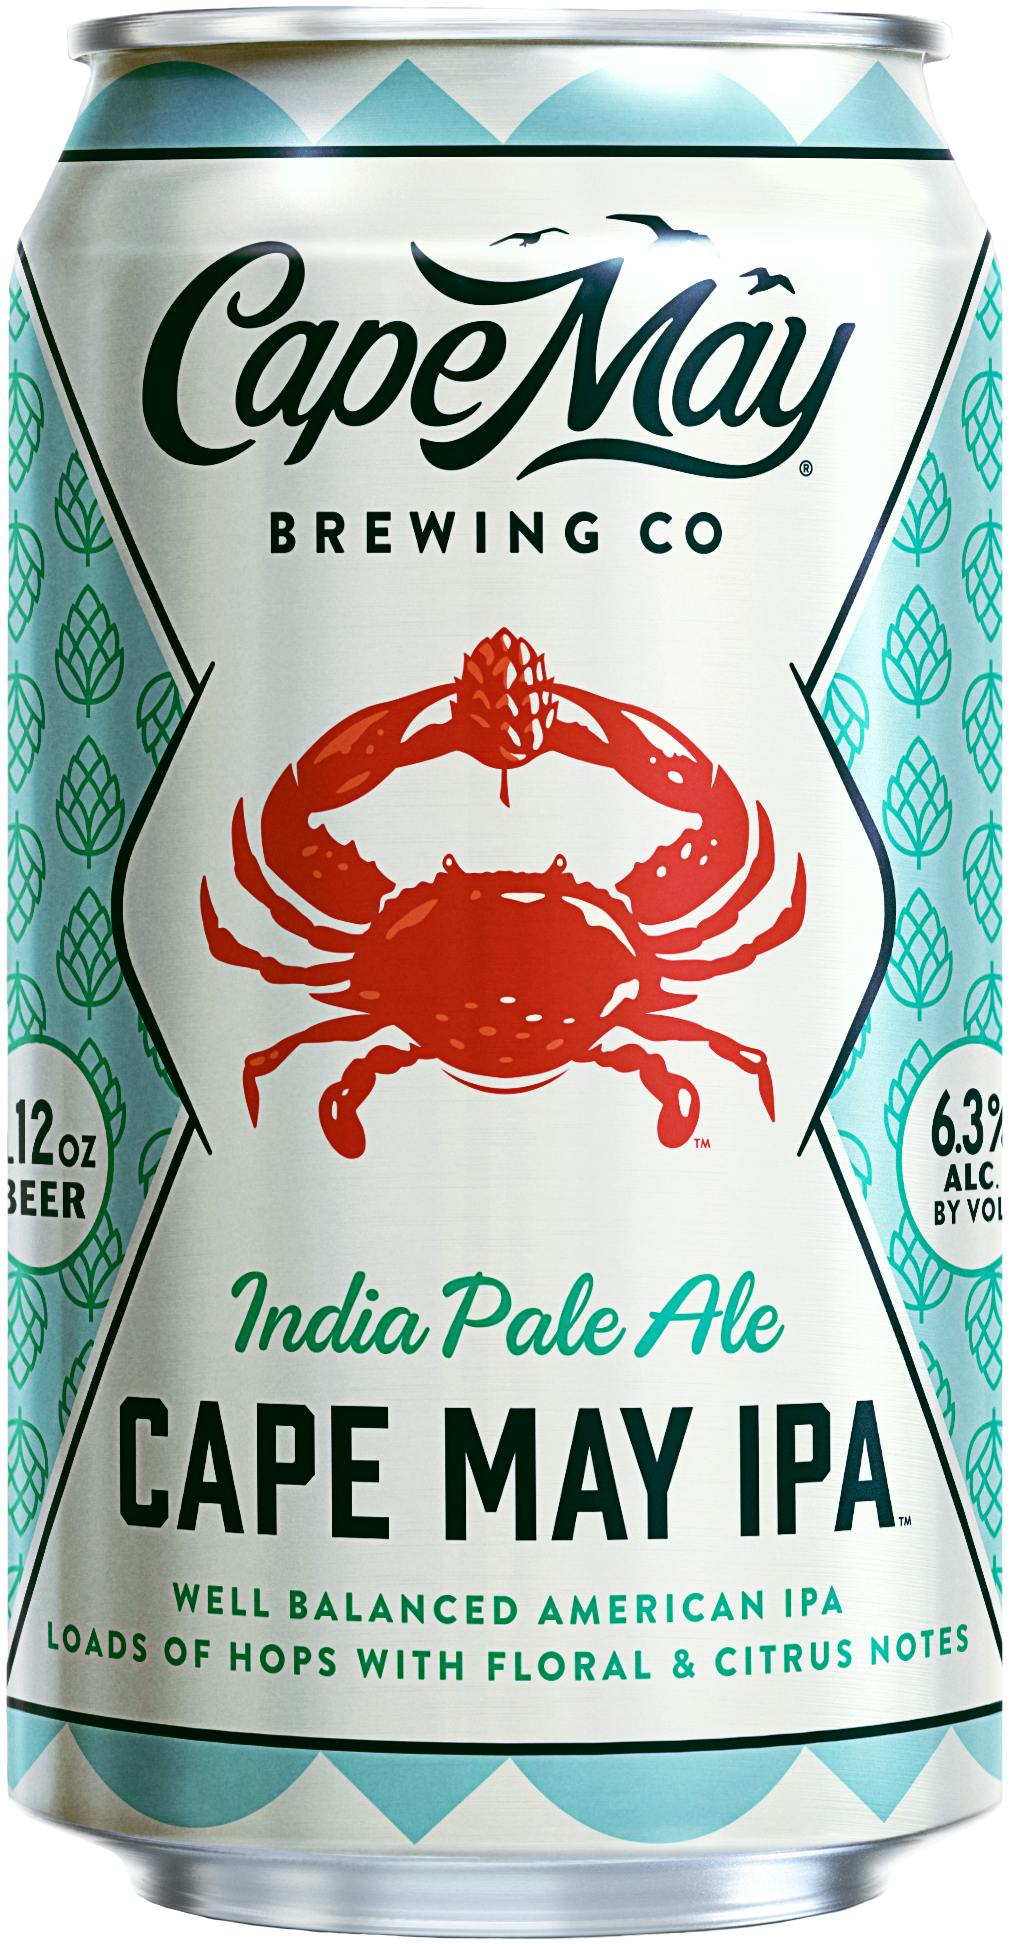 Cape May Brewing Company Hard Iced Tea 6 pack 12 oz. Can - Vine